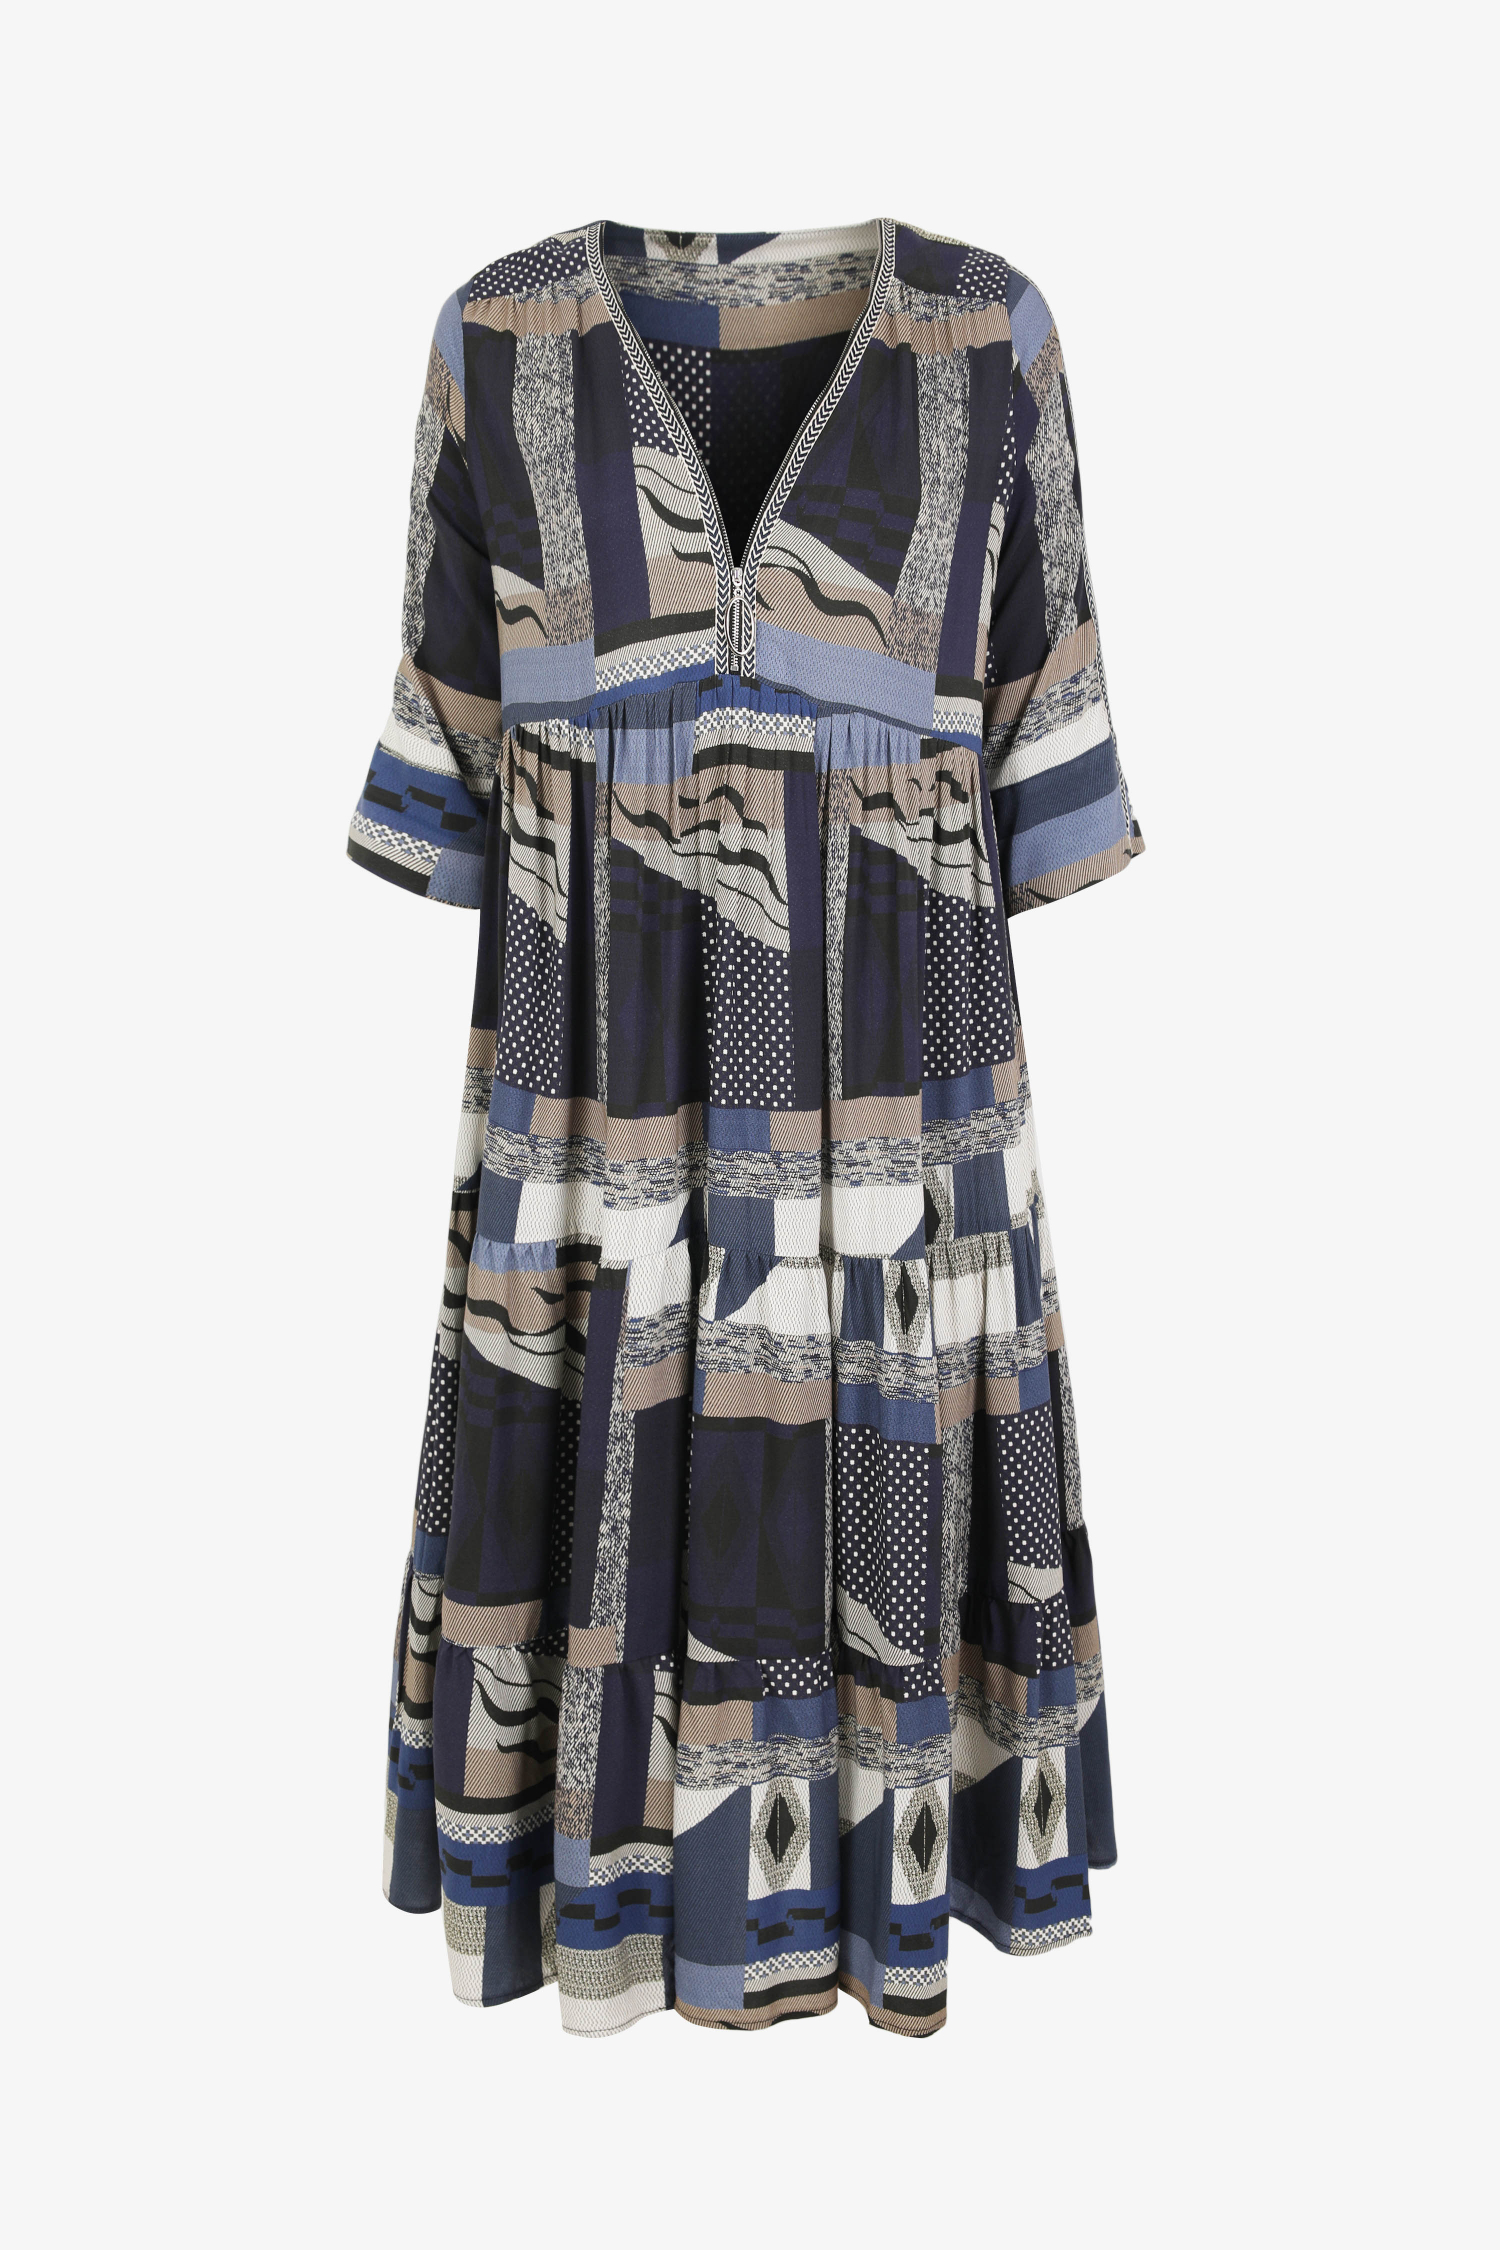 Long dress with zip in éco-responsable fabric patch print (expedition March 5/10)